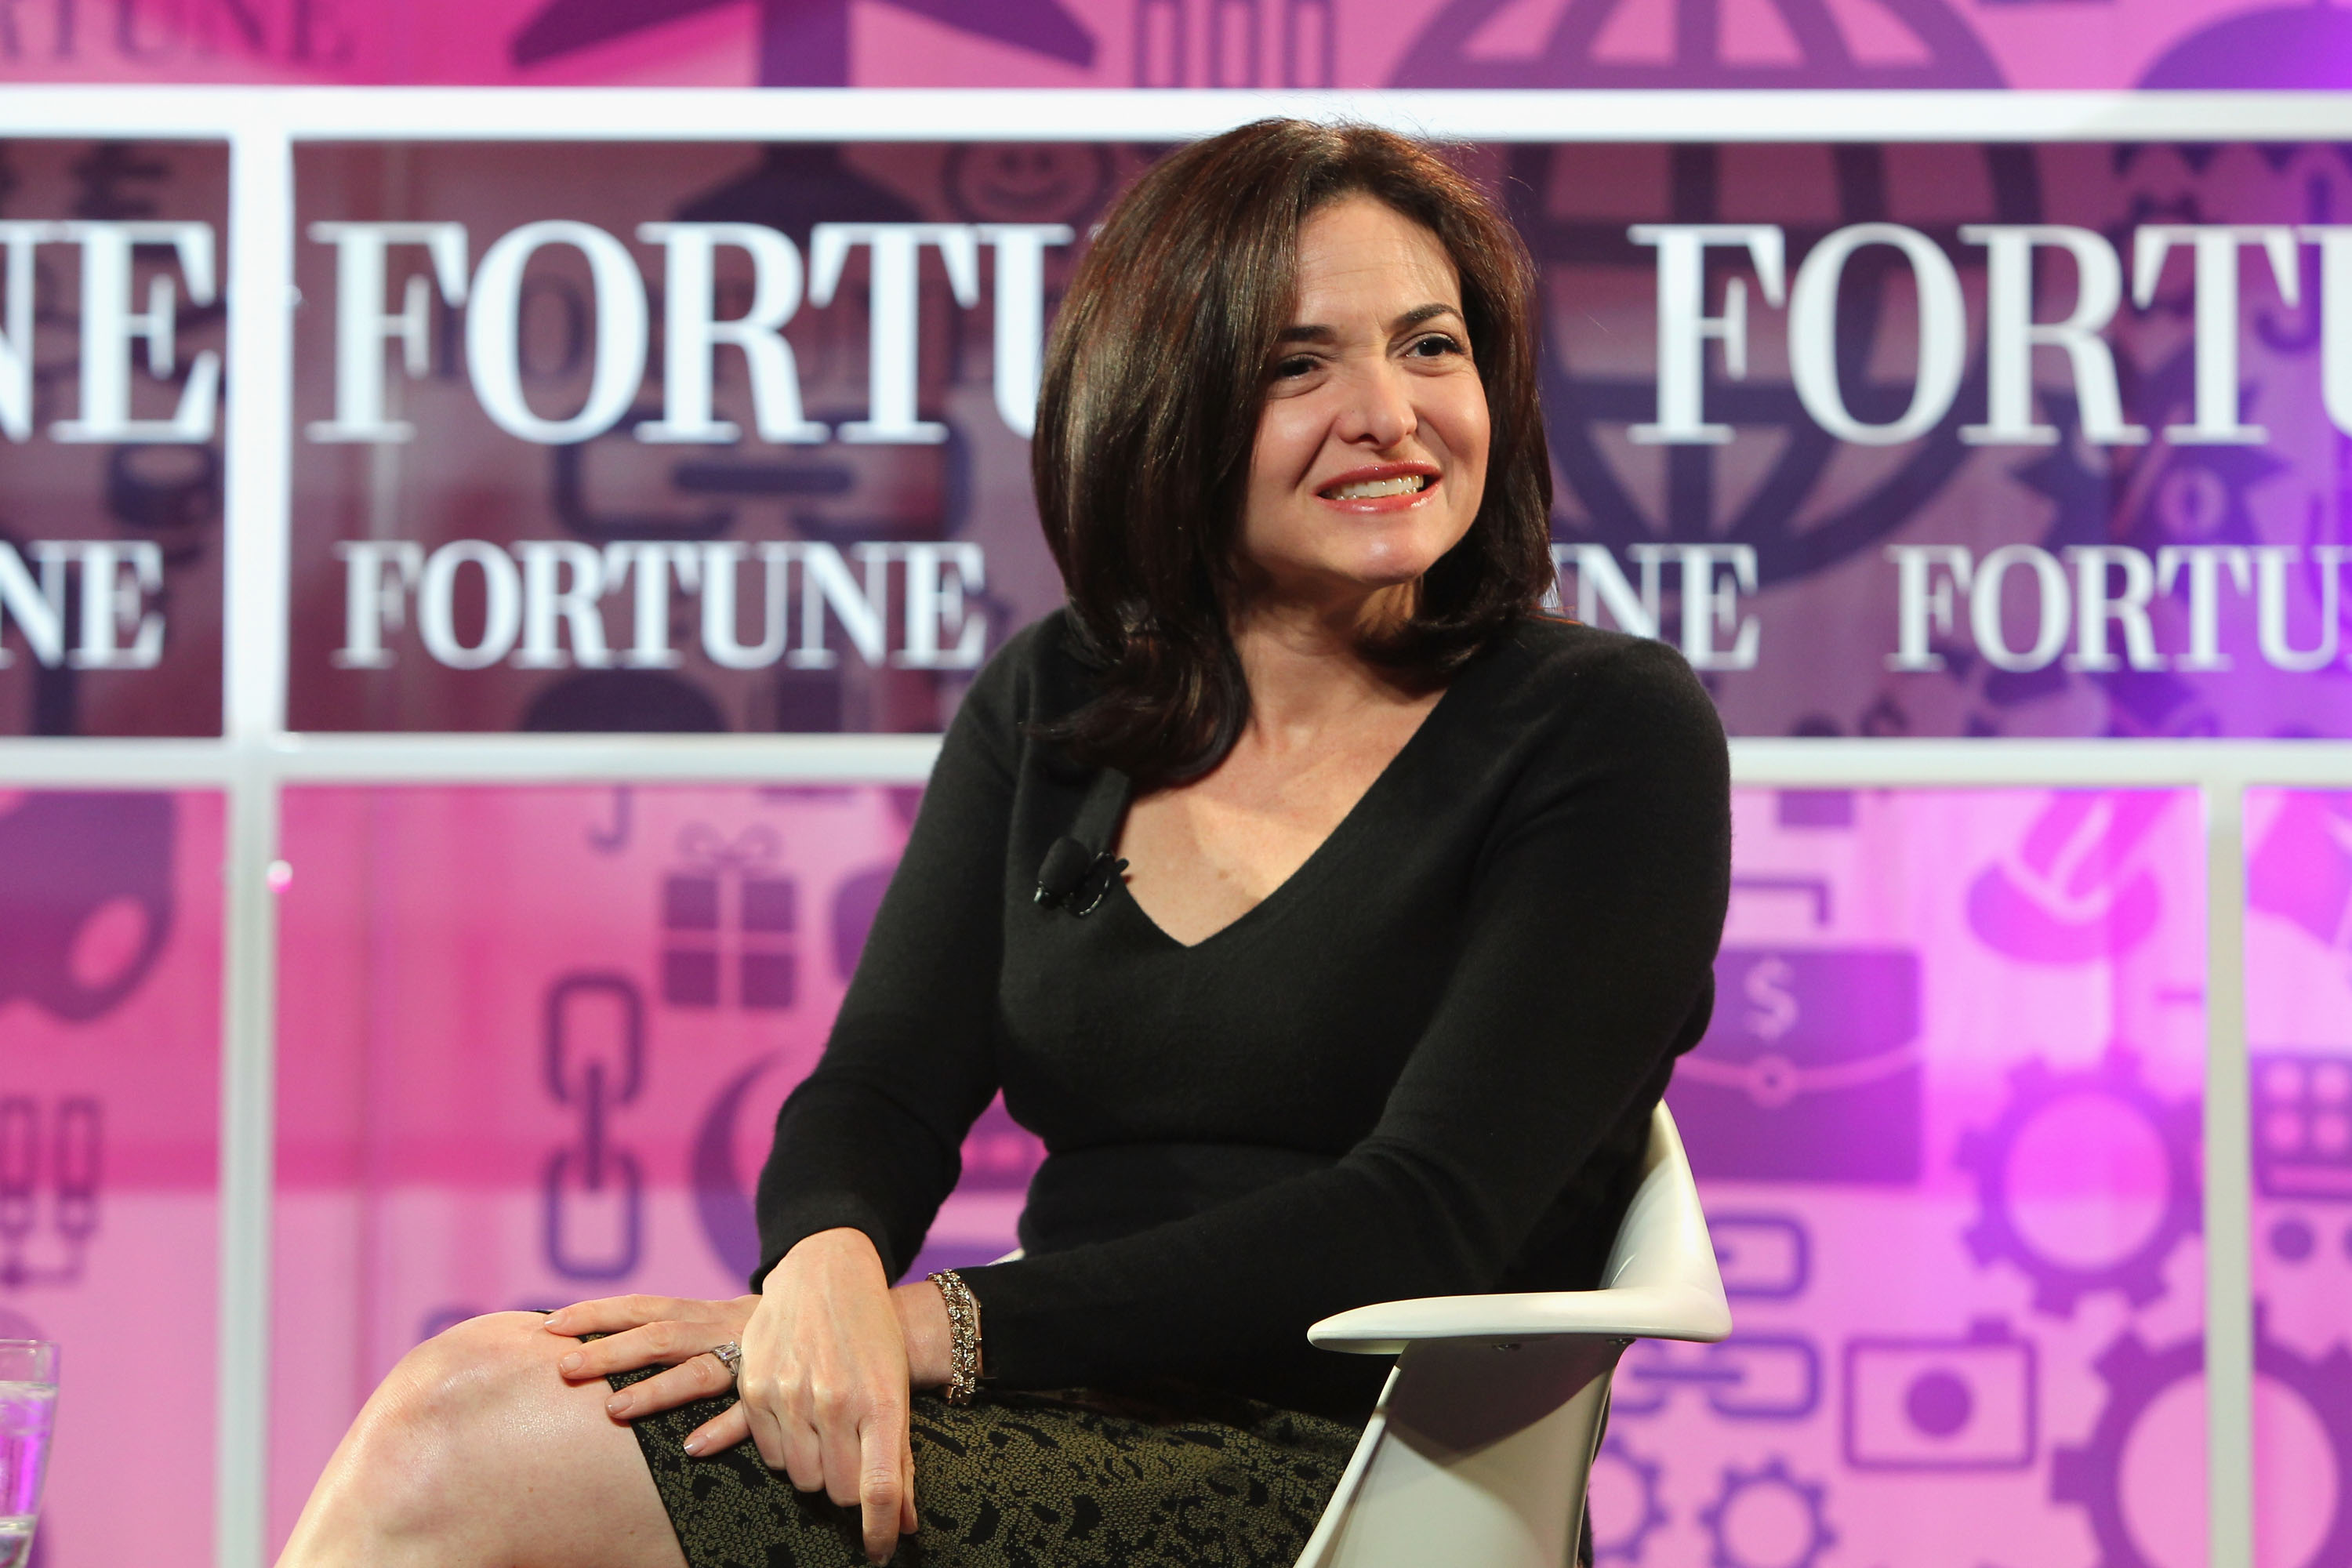 Chief operating officer of Facebook Sheryl Sandberg speaks onstage at the FORTUNE Most Powerful Women Summit on Oct. 16, 2013 in Washington D.C. (Paul Morigi—Getty Images)